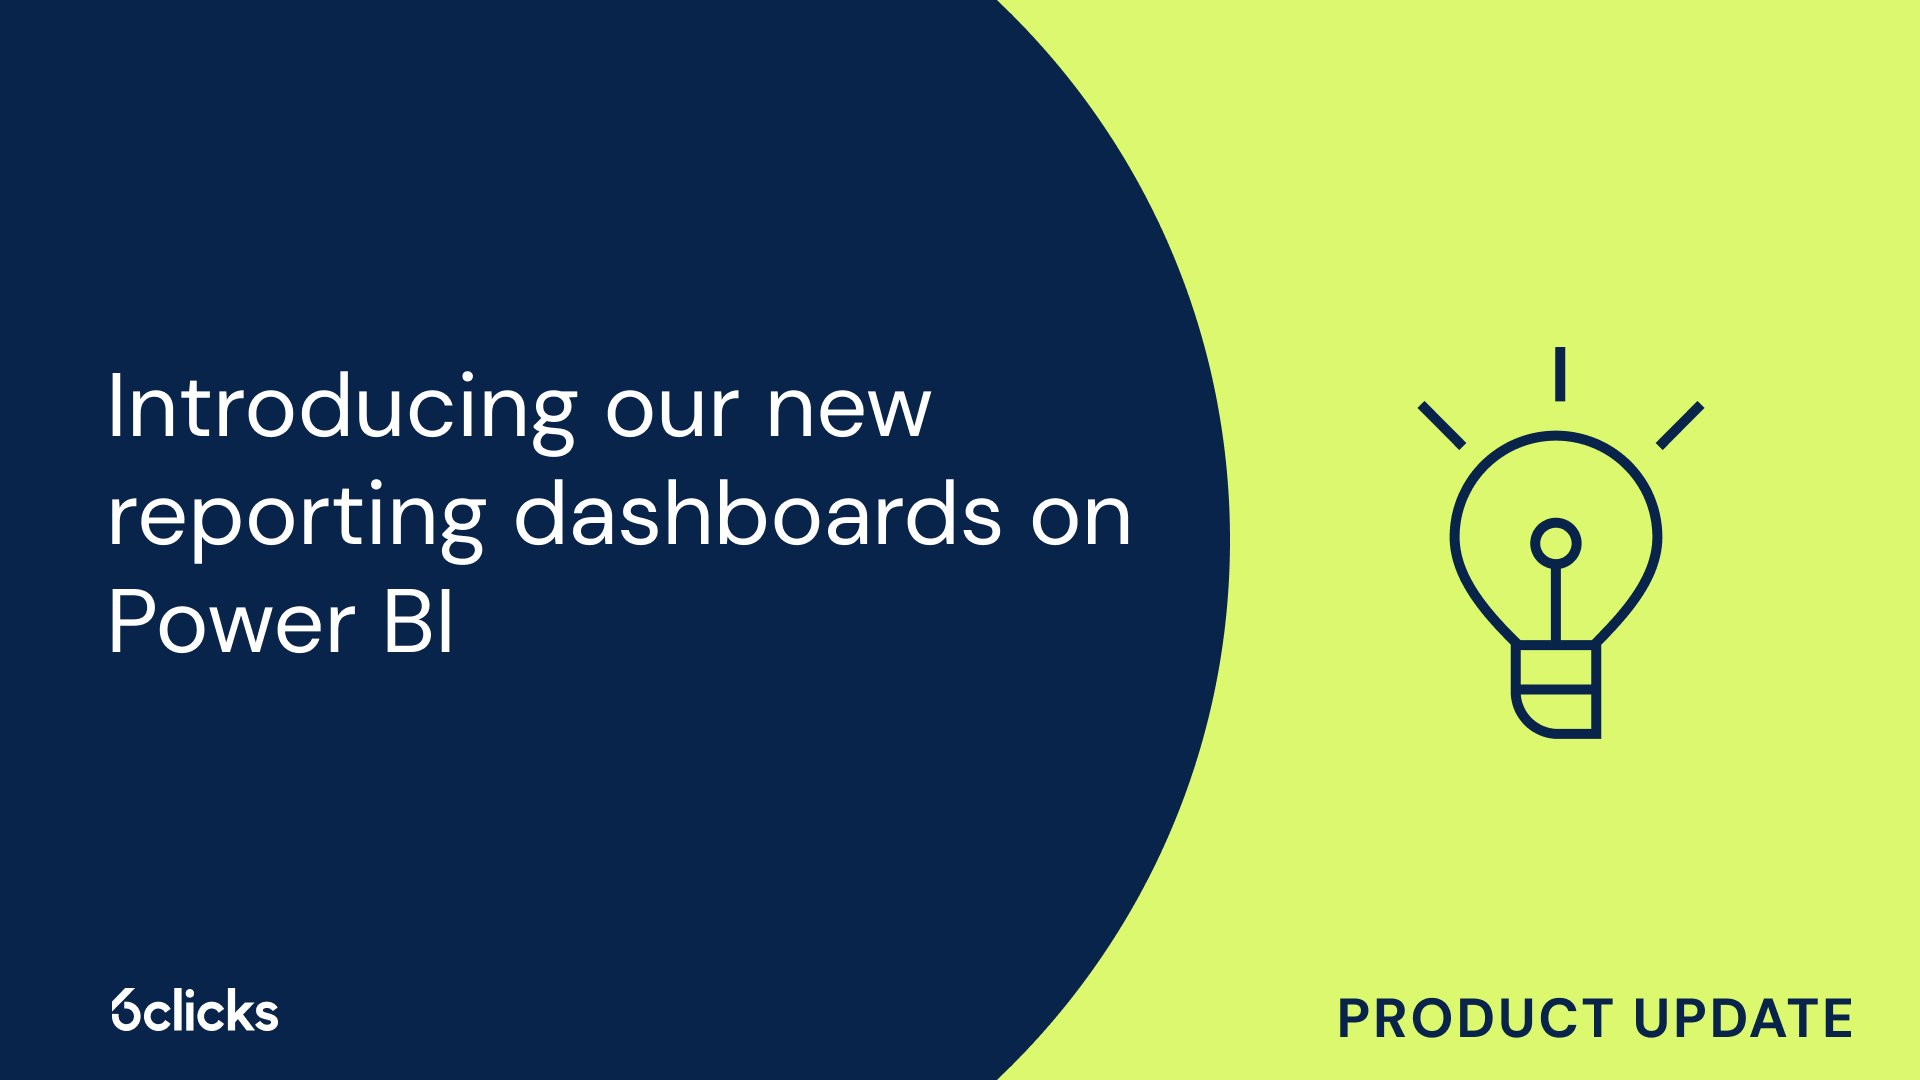 Introducing our new reporting dashboards on Power BI